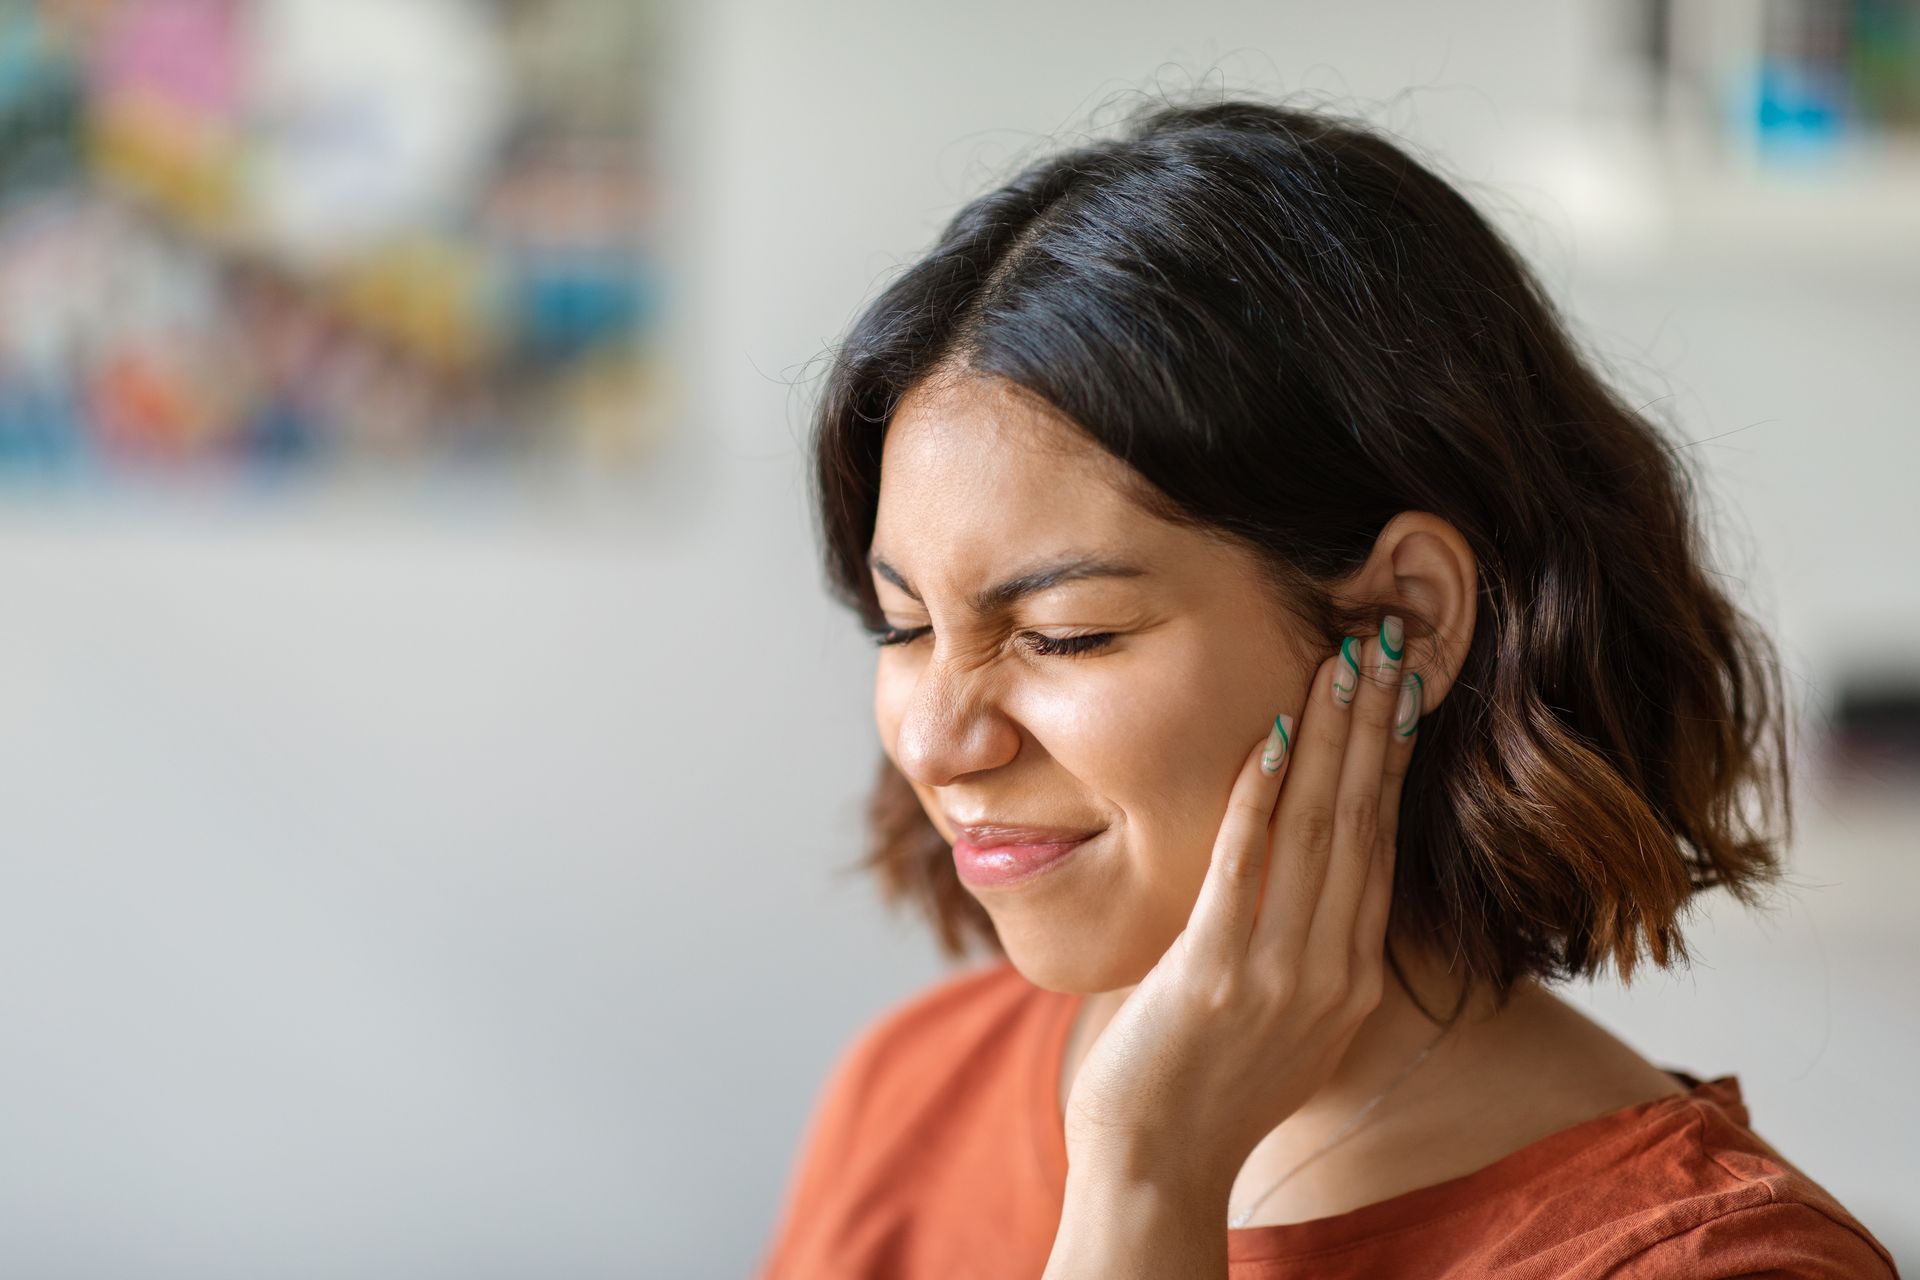 A woman is holding her ear because she has an ear pain.